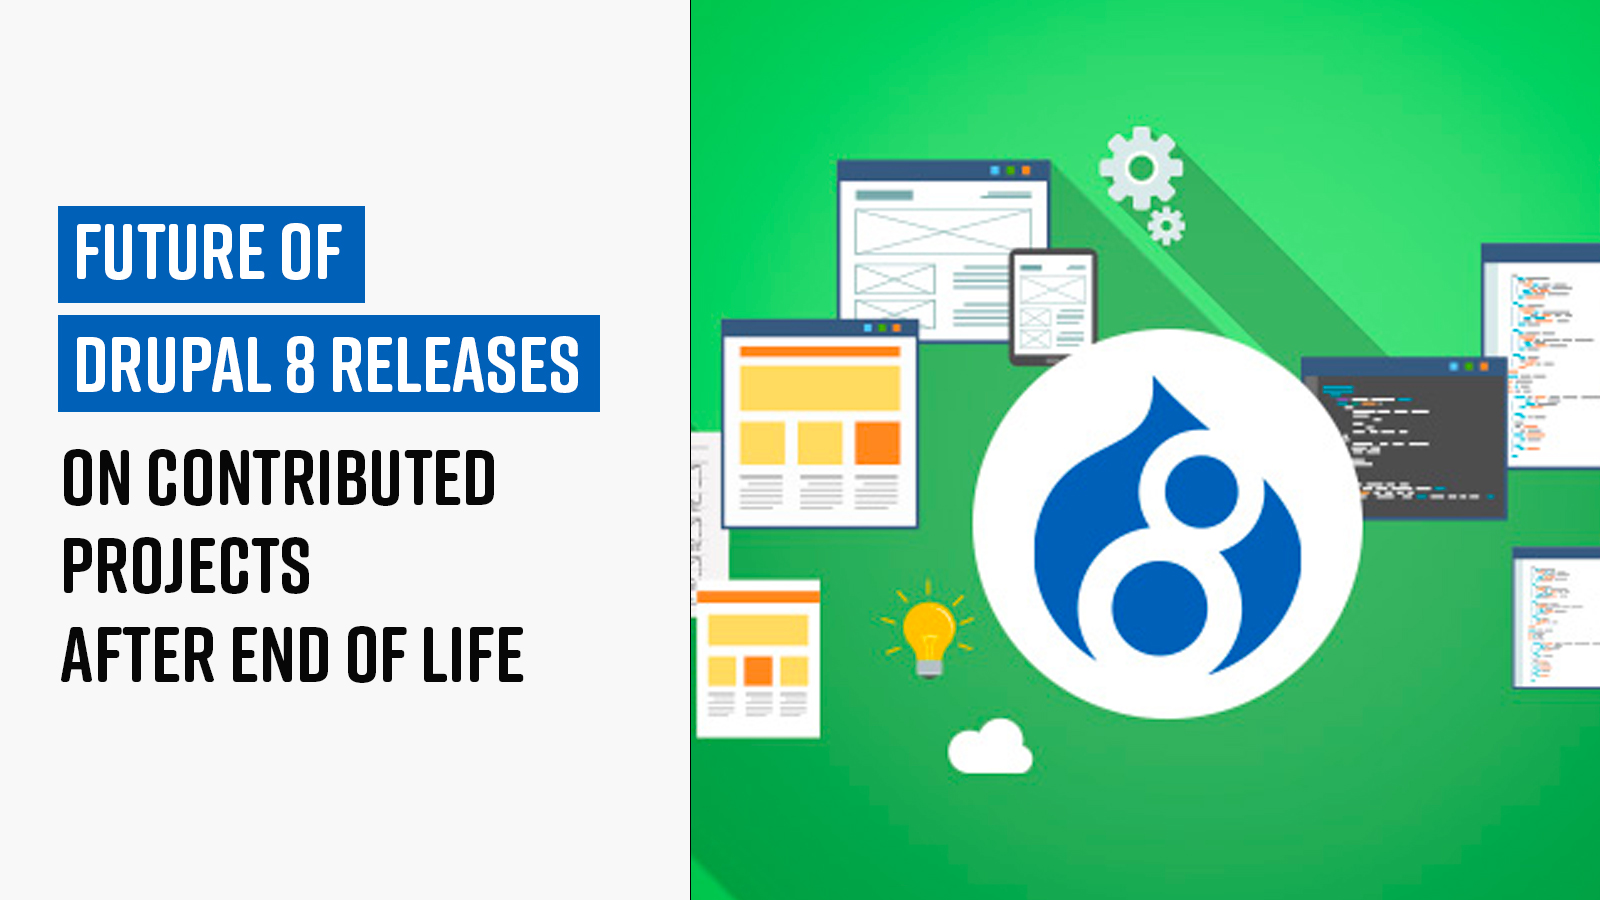 What happens to your Drupal 8 Releases on contributed projects after Drupal 8’s end of life?